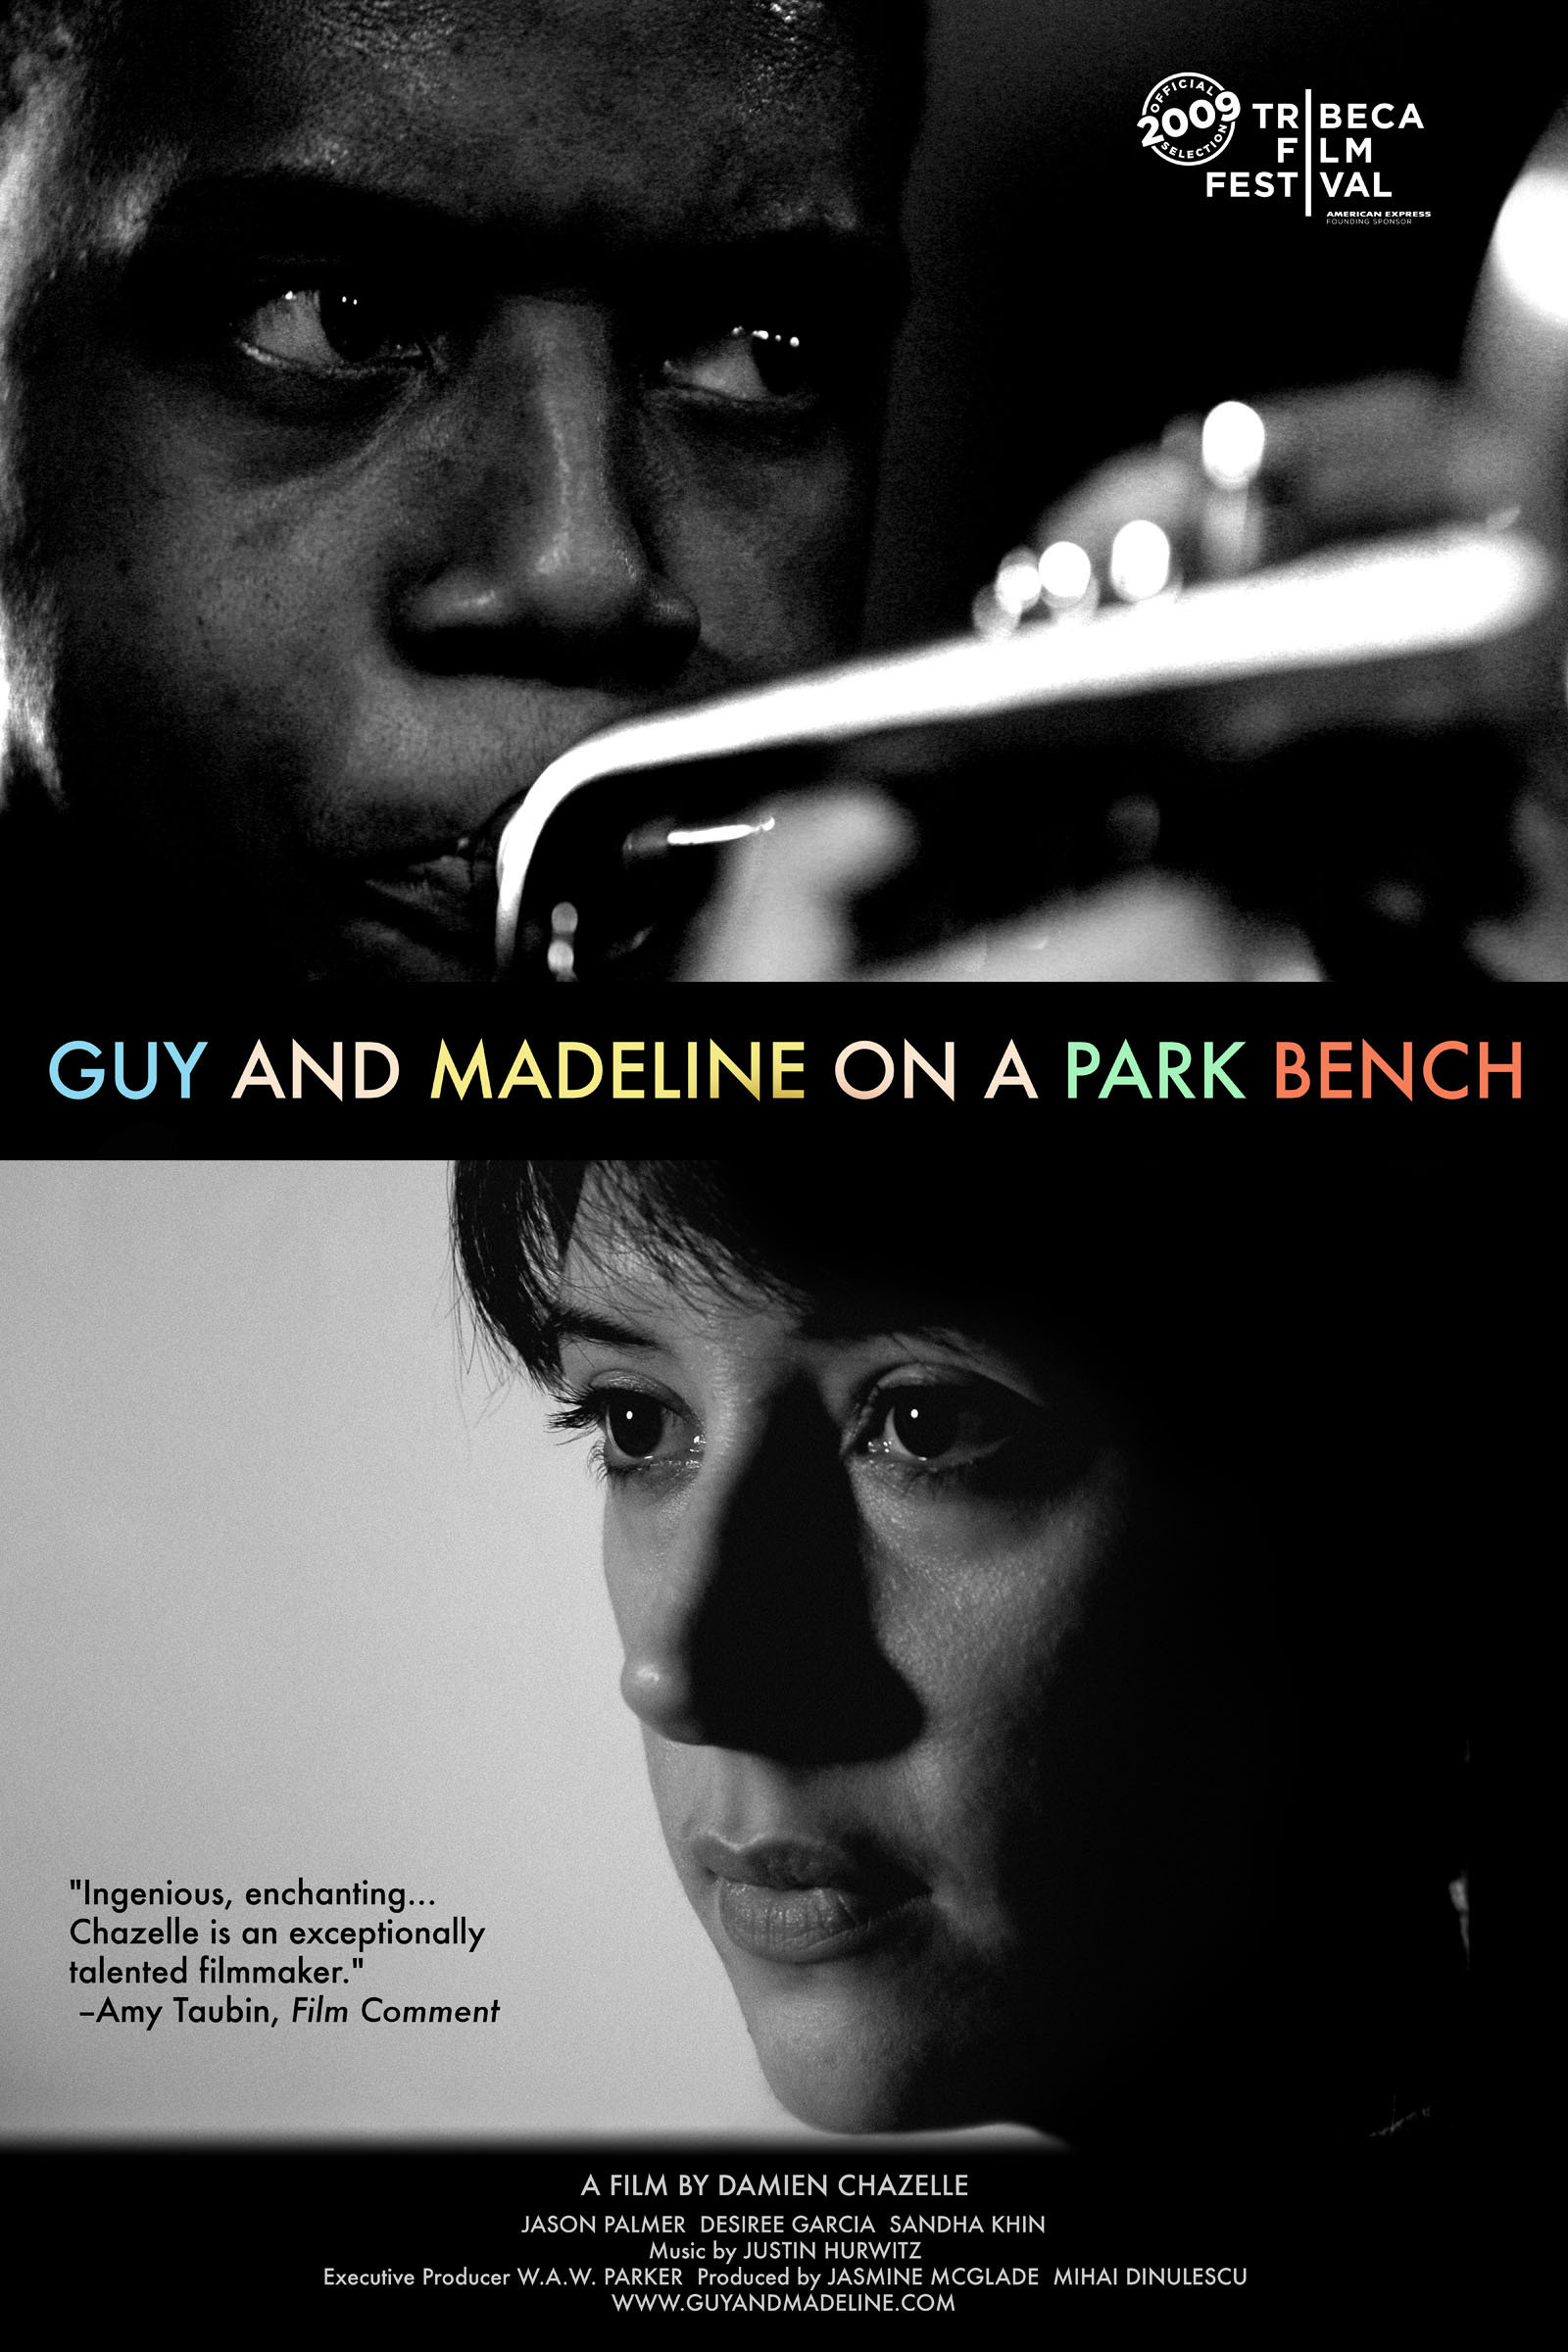 Guy and Madeline on a Park Bench (2009) Screenshot 2